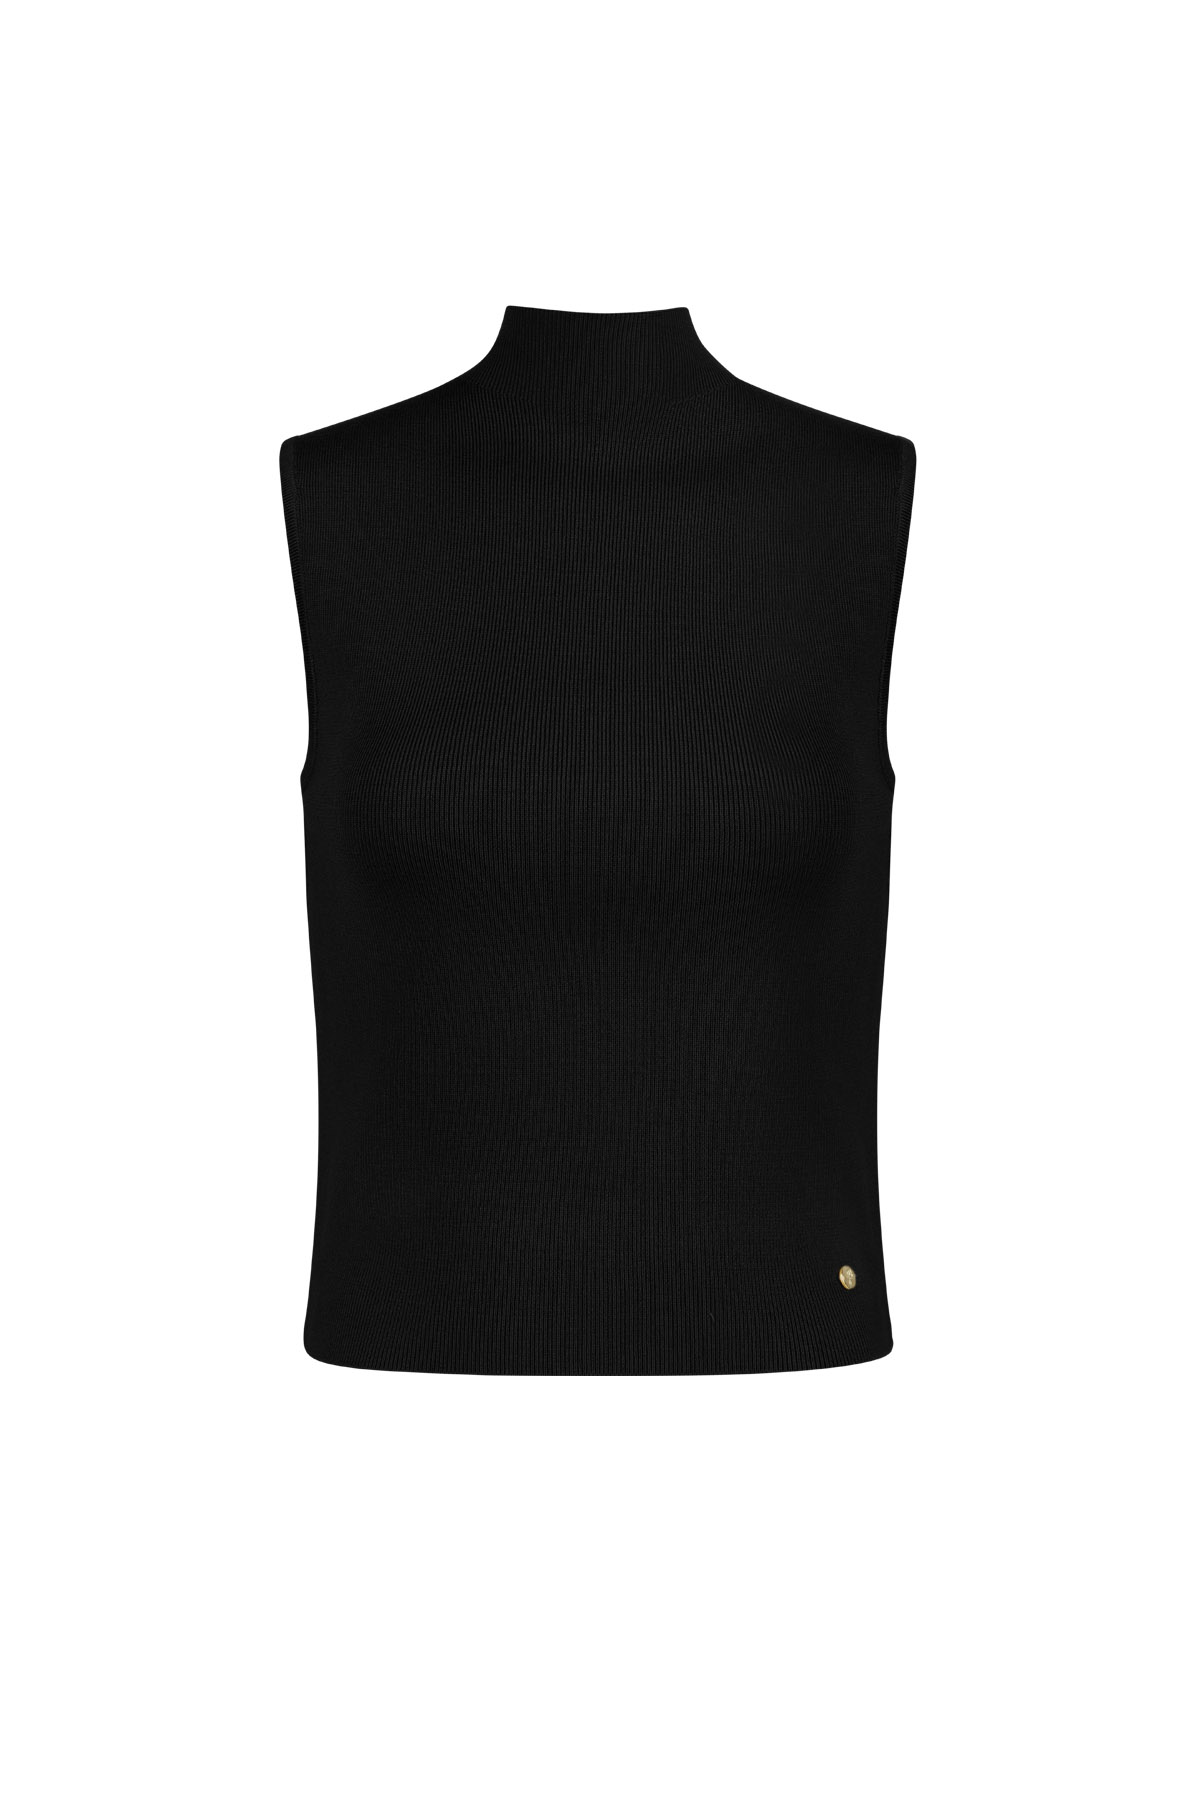 Sleeveless top with low turtleneck large/extra large – black h5 